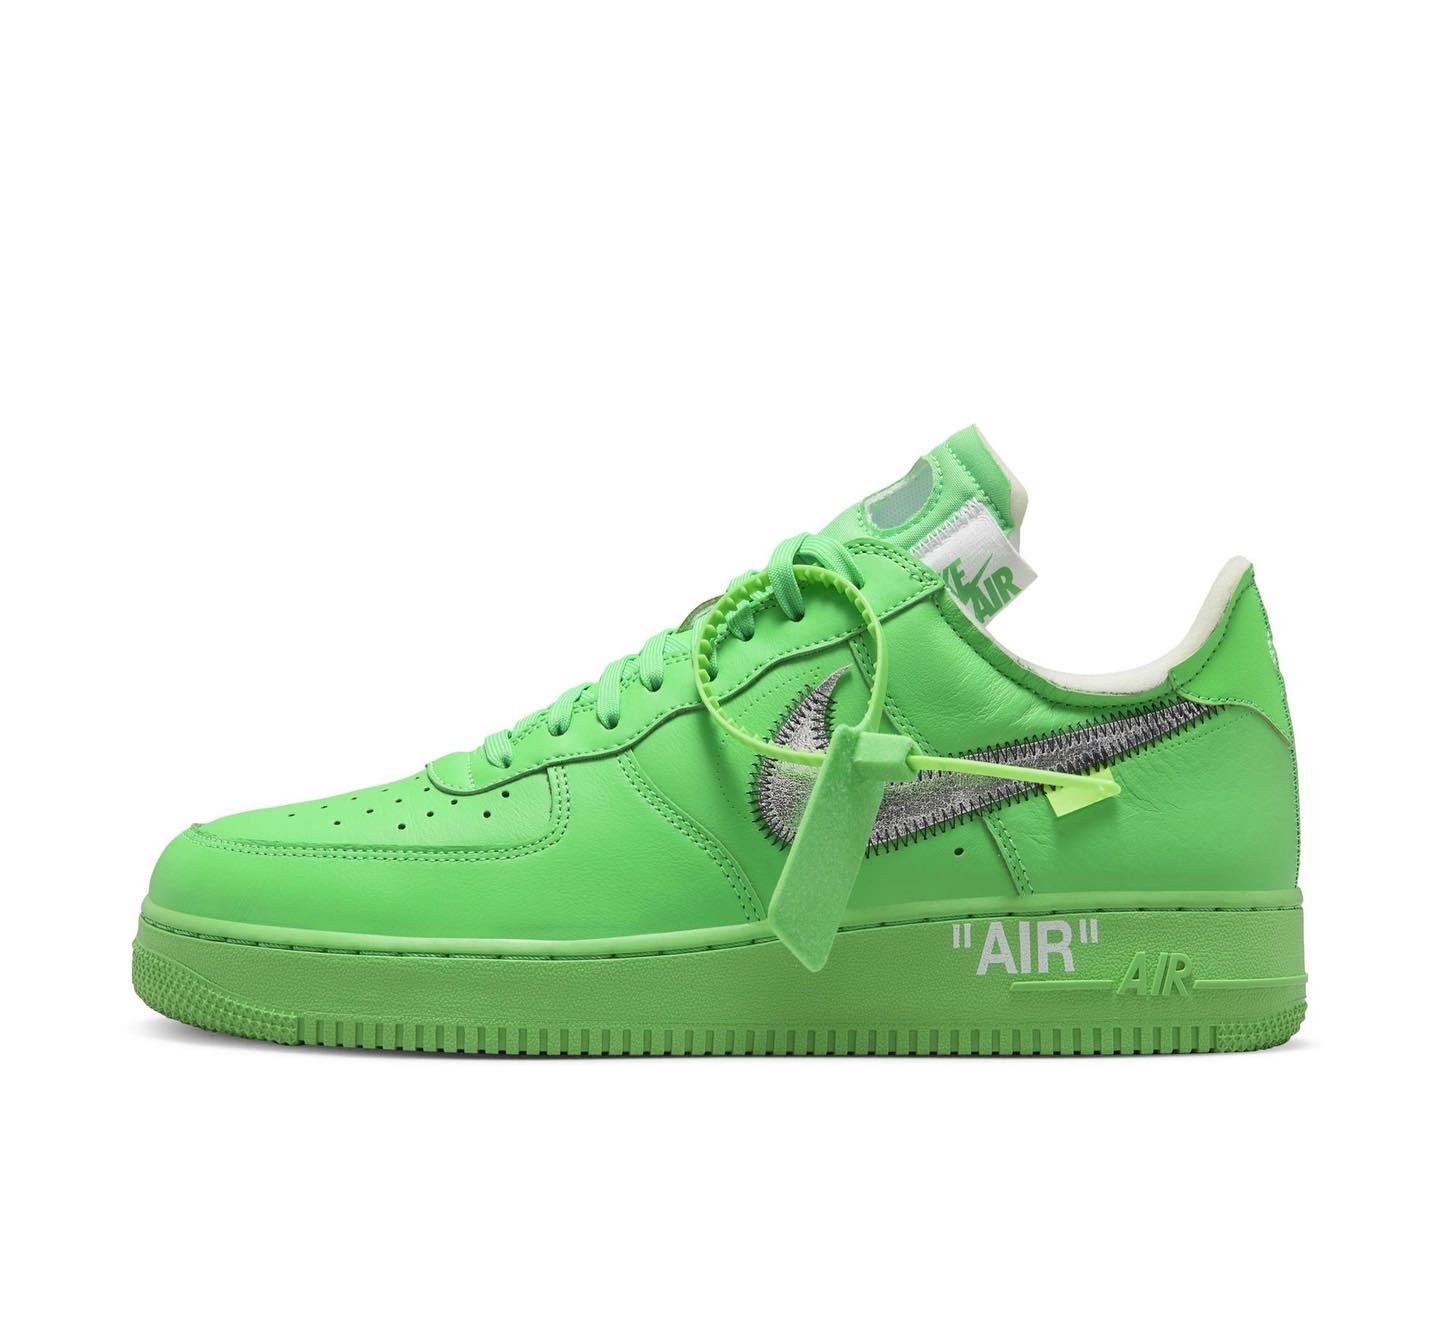 Nike Air Force 1 Low Off white Brooklyn (Light Green Spark) size 6.5